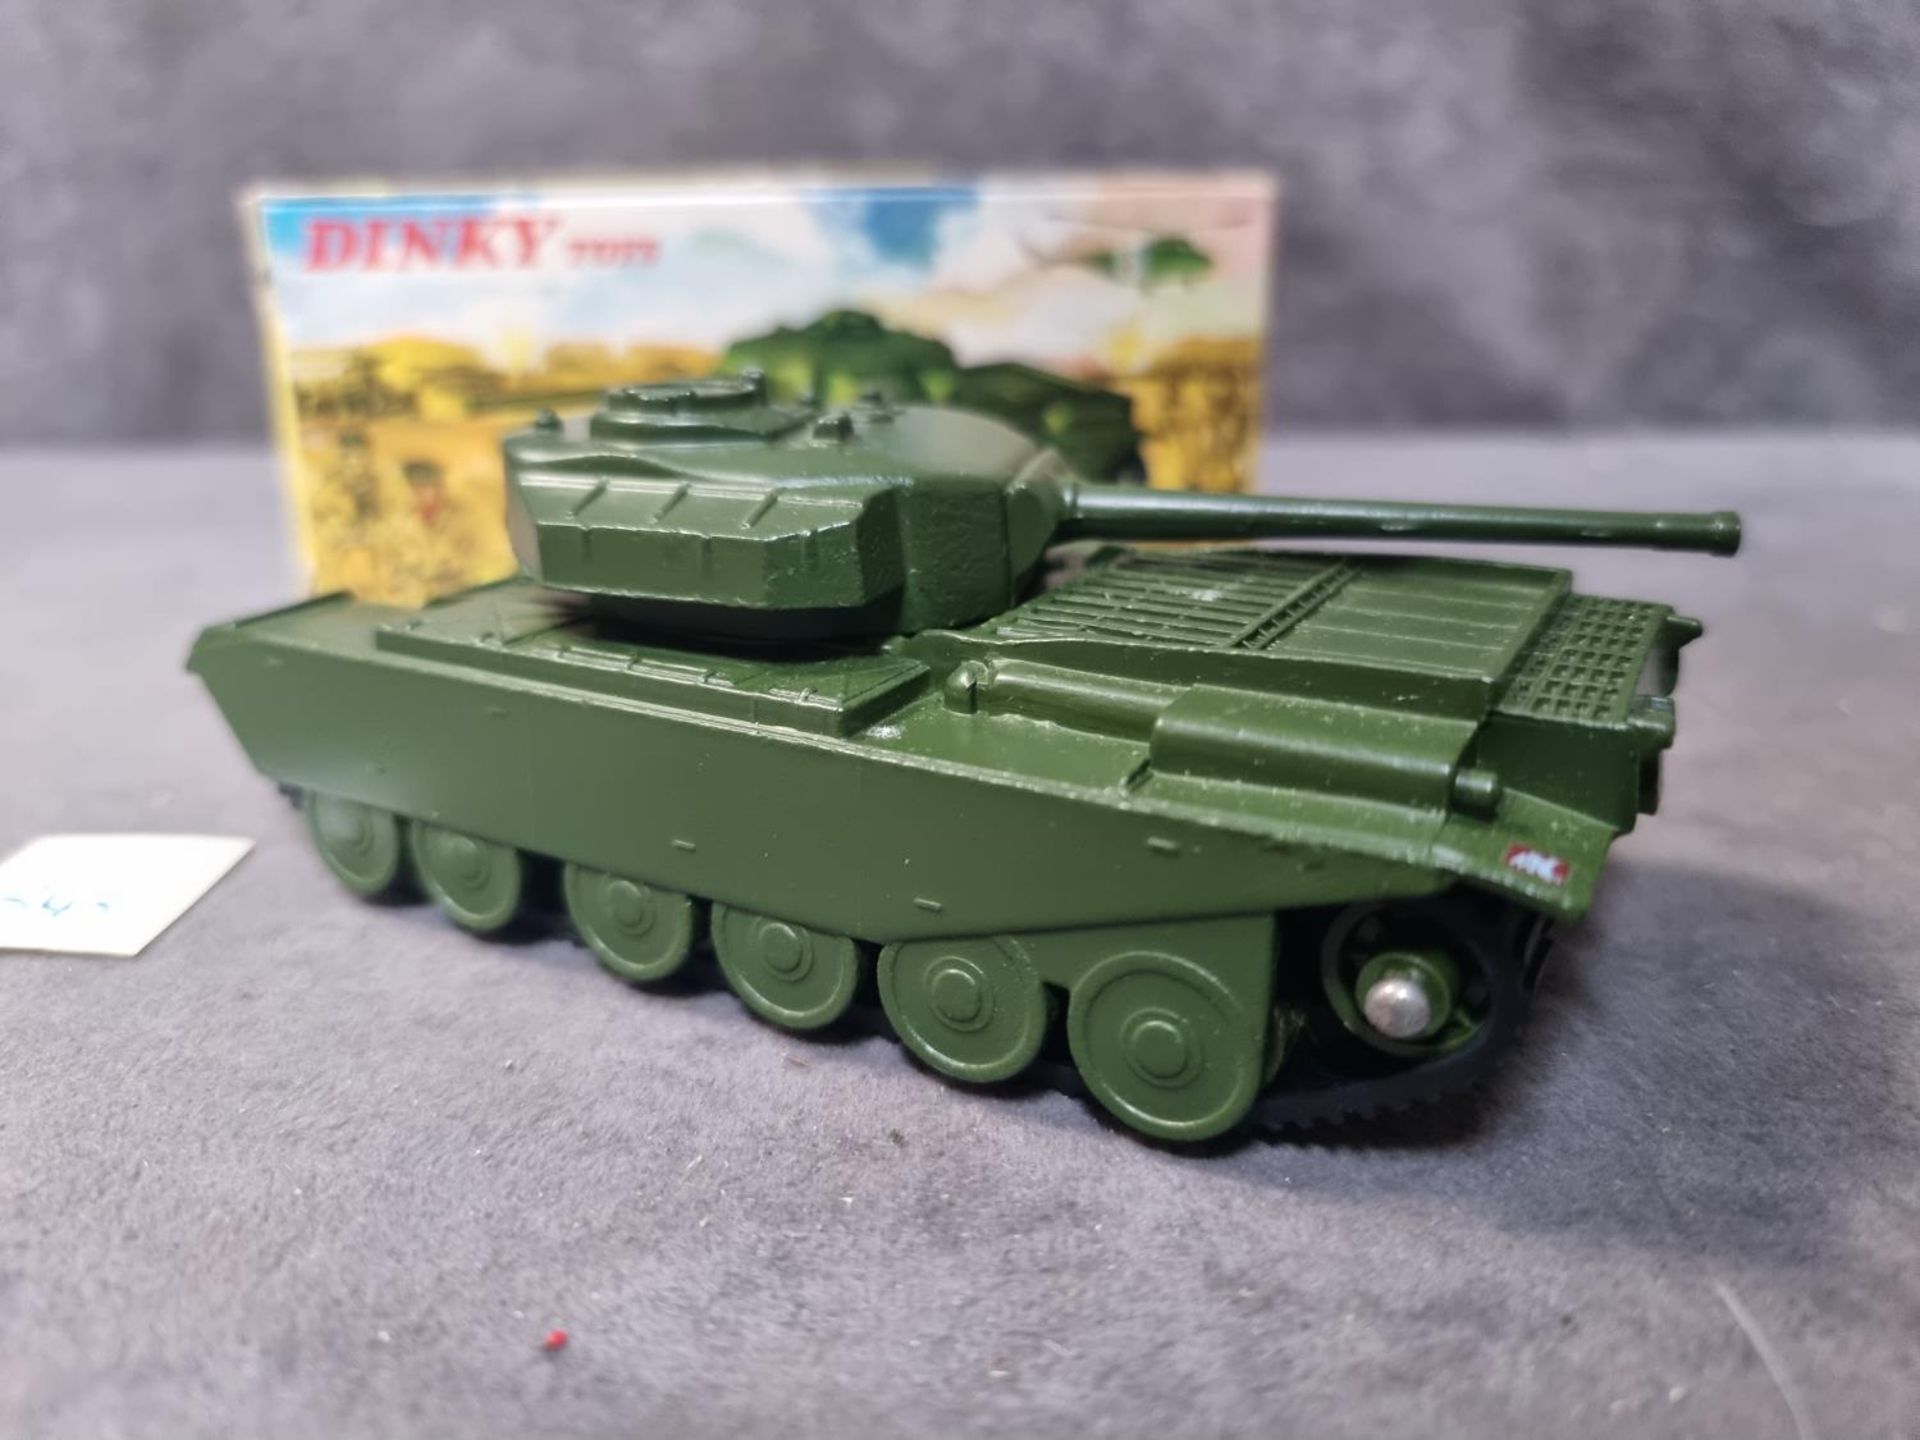 Dinky #651 Centurion Tank Green Rubber Tracks And Rotating Turret In Box 1954-1970 Near Mint In - Image 2 of 3